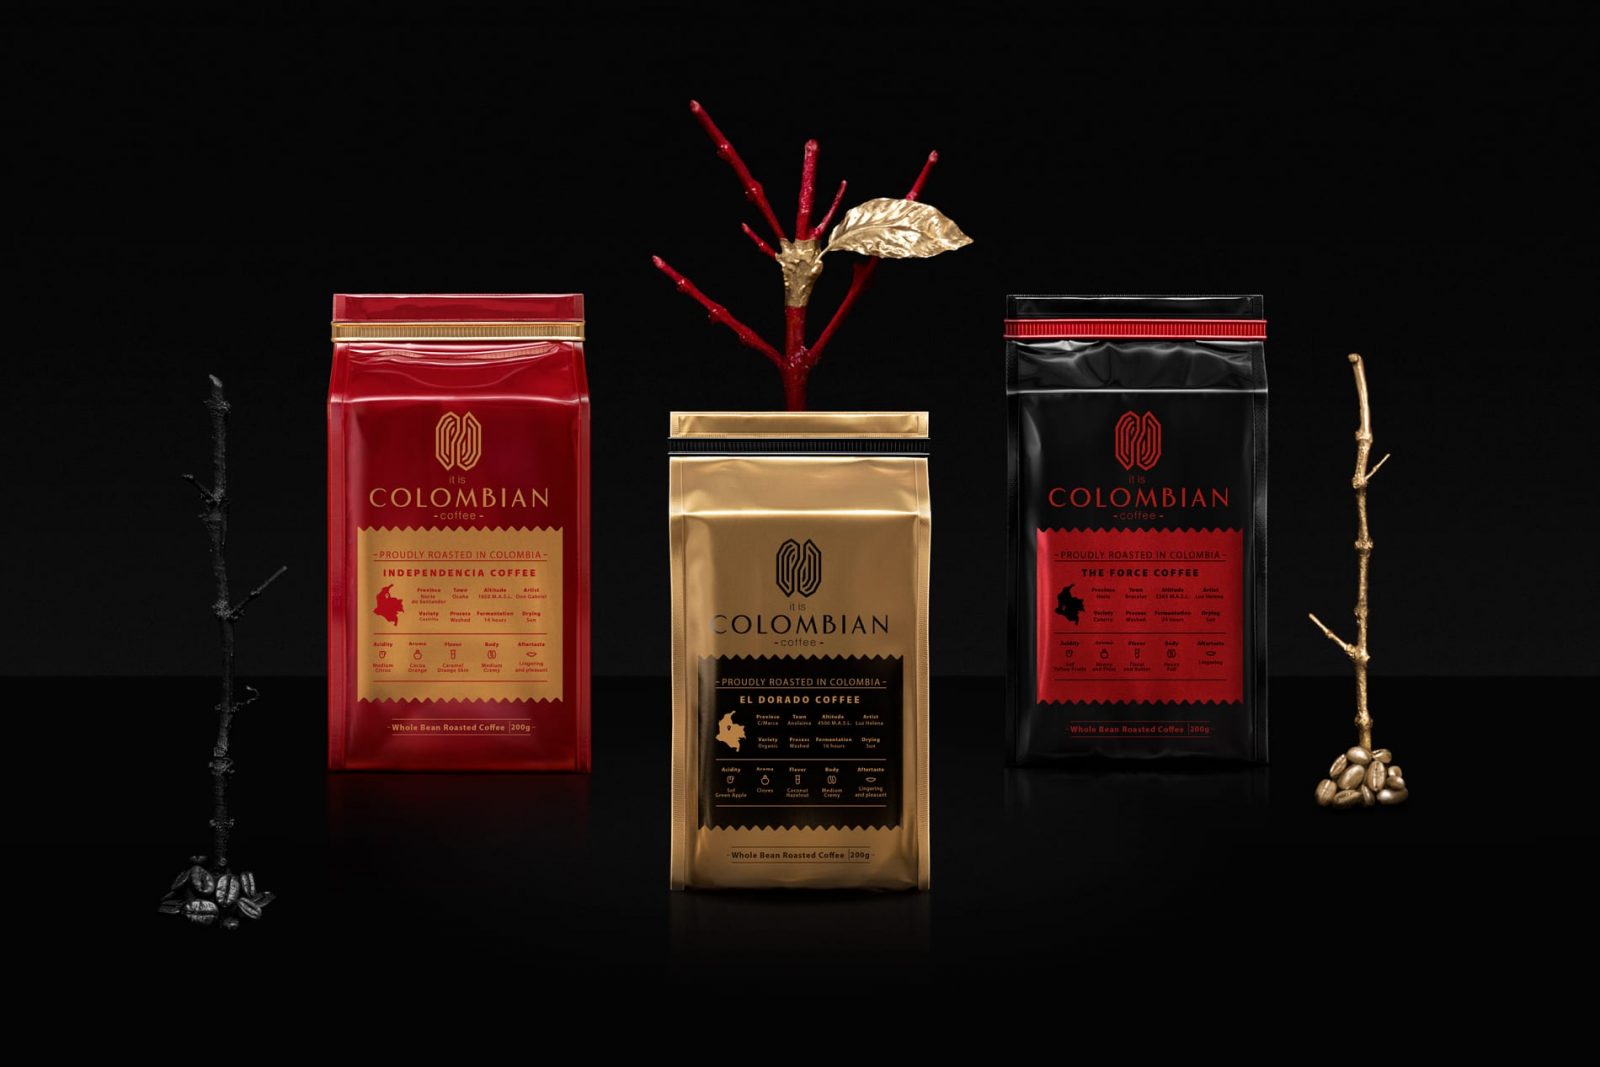 Colombian Premium Artisanal Coffee Brand Design and Packaging Design Commercialized in Hong Kong